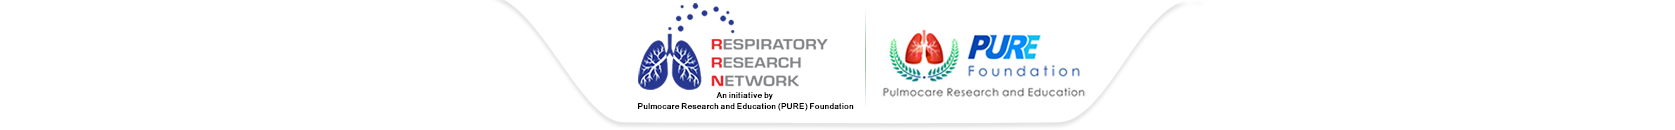 Respiratory Research Network